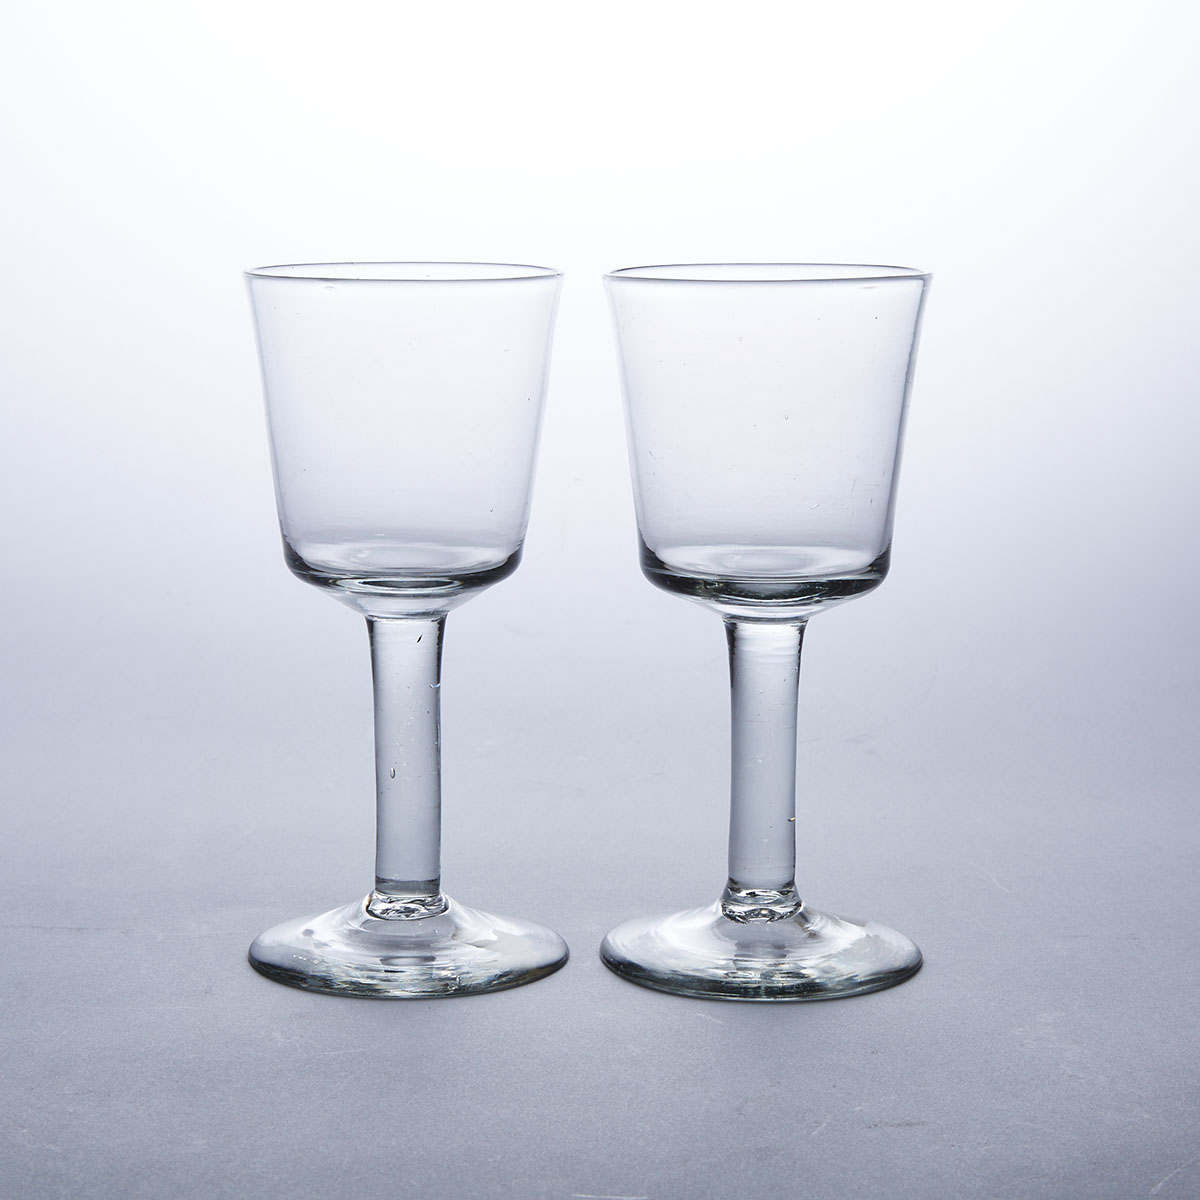 Pair of English Plain Stemmed Glass Goblets, mid-18th century